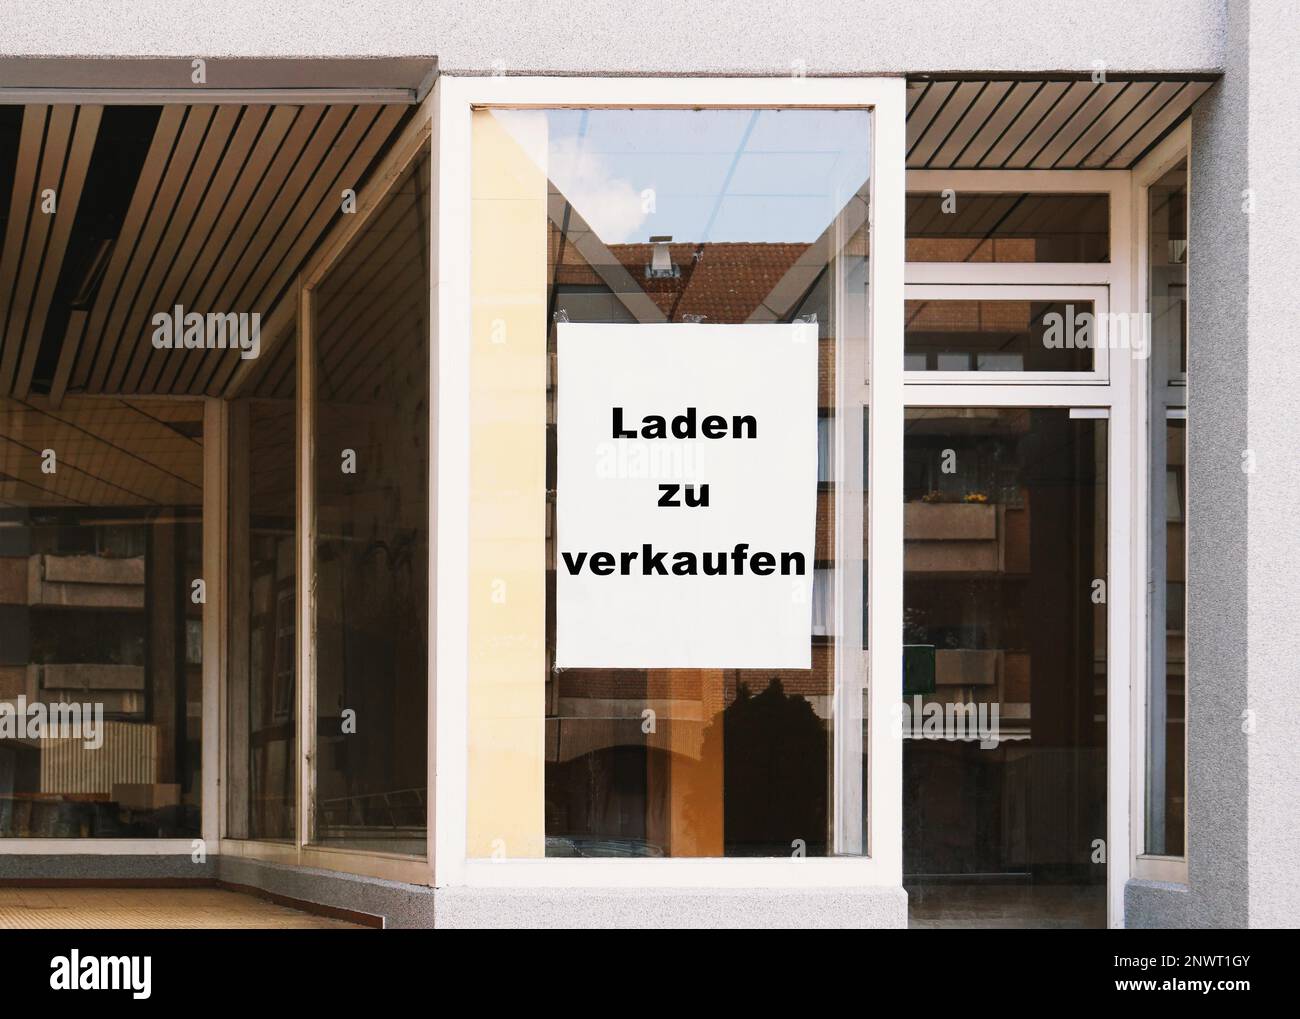 Laden zu verkaufen - translates as store for sale - german sign in shop window - vacancy due to business closure - economy crisis and recession Stock Photo